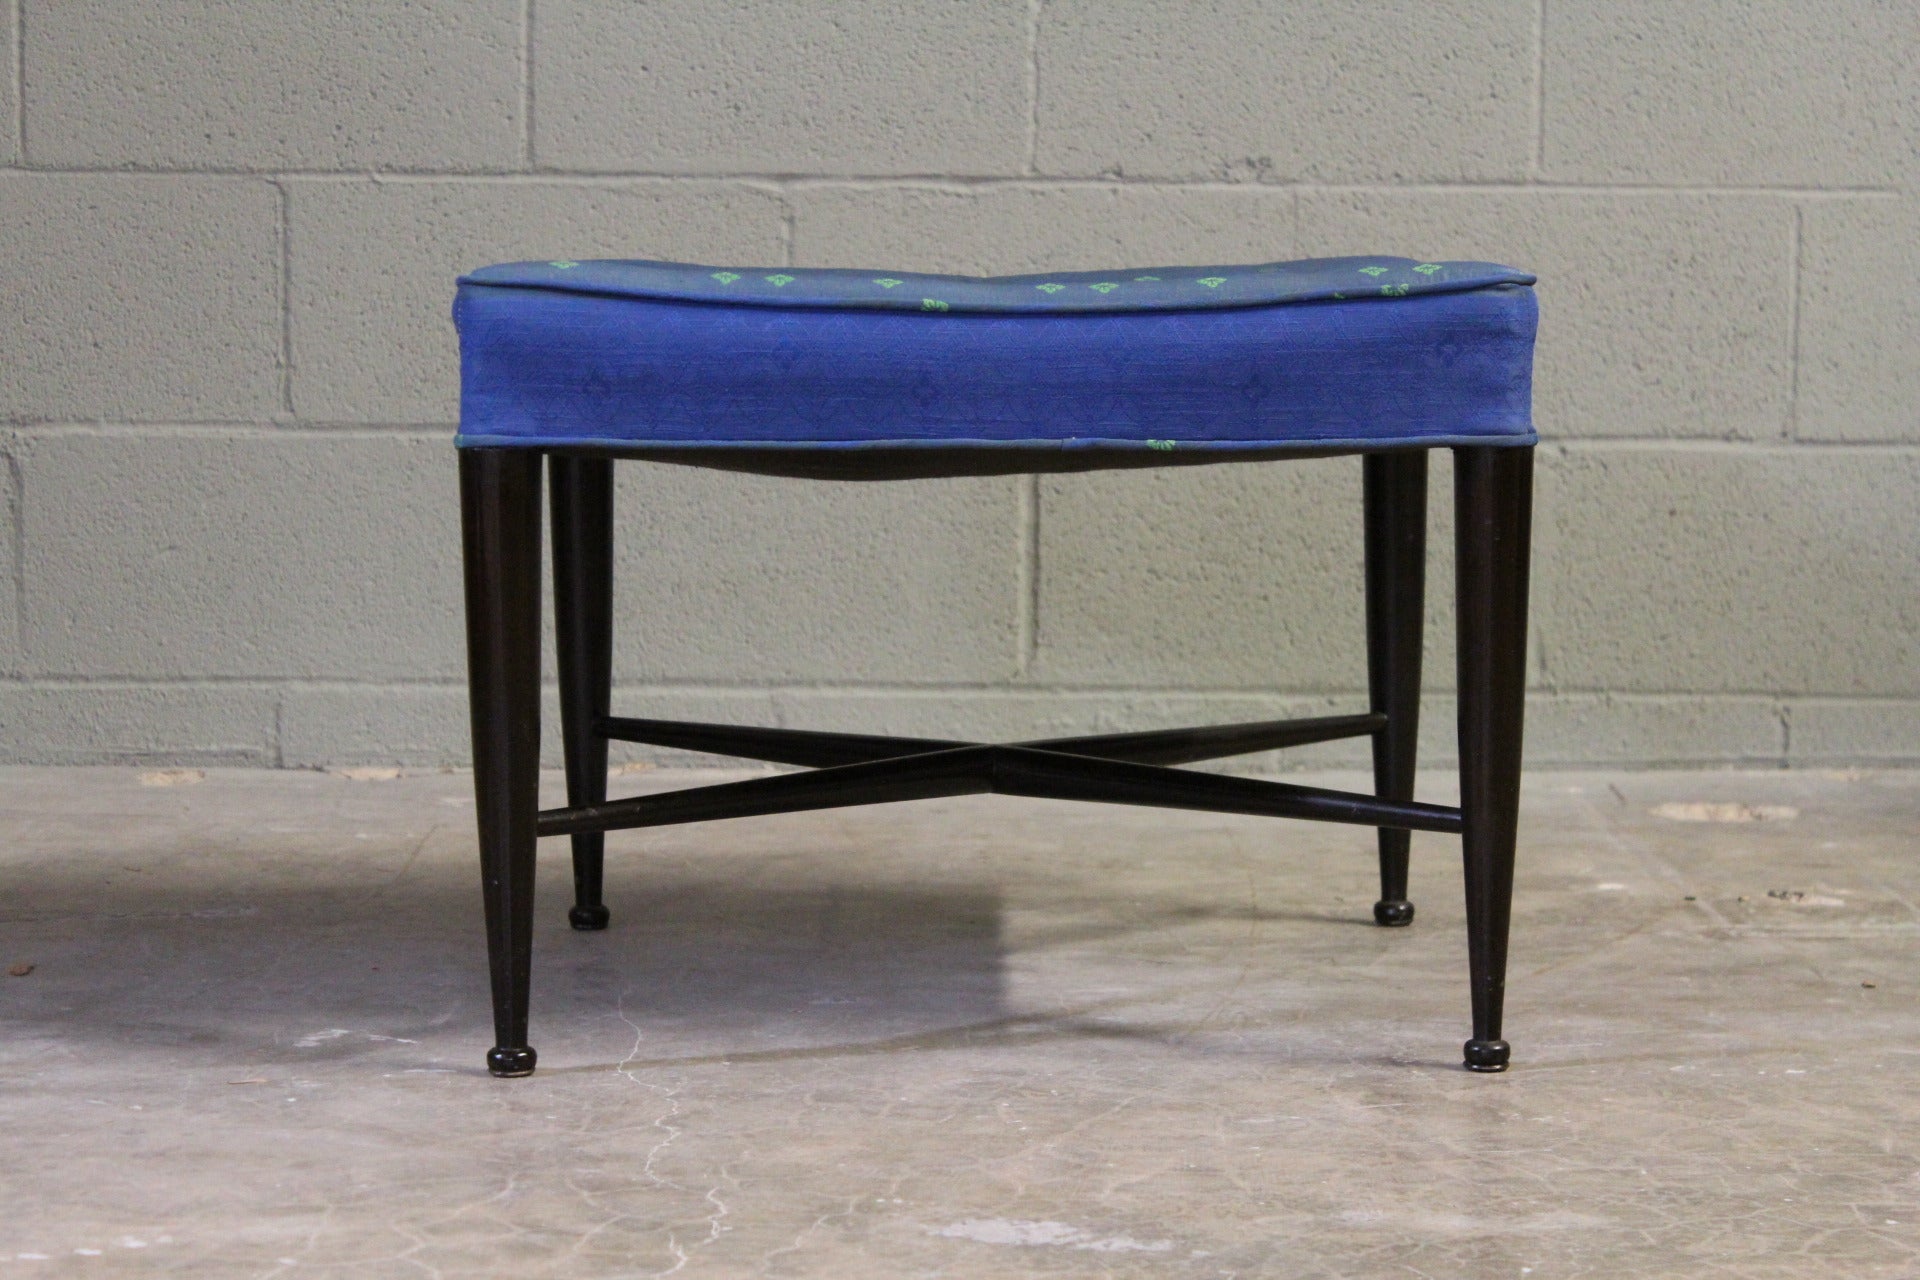 The Thebes Stool by Edward Wormley for Dunbar (4 available)